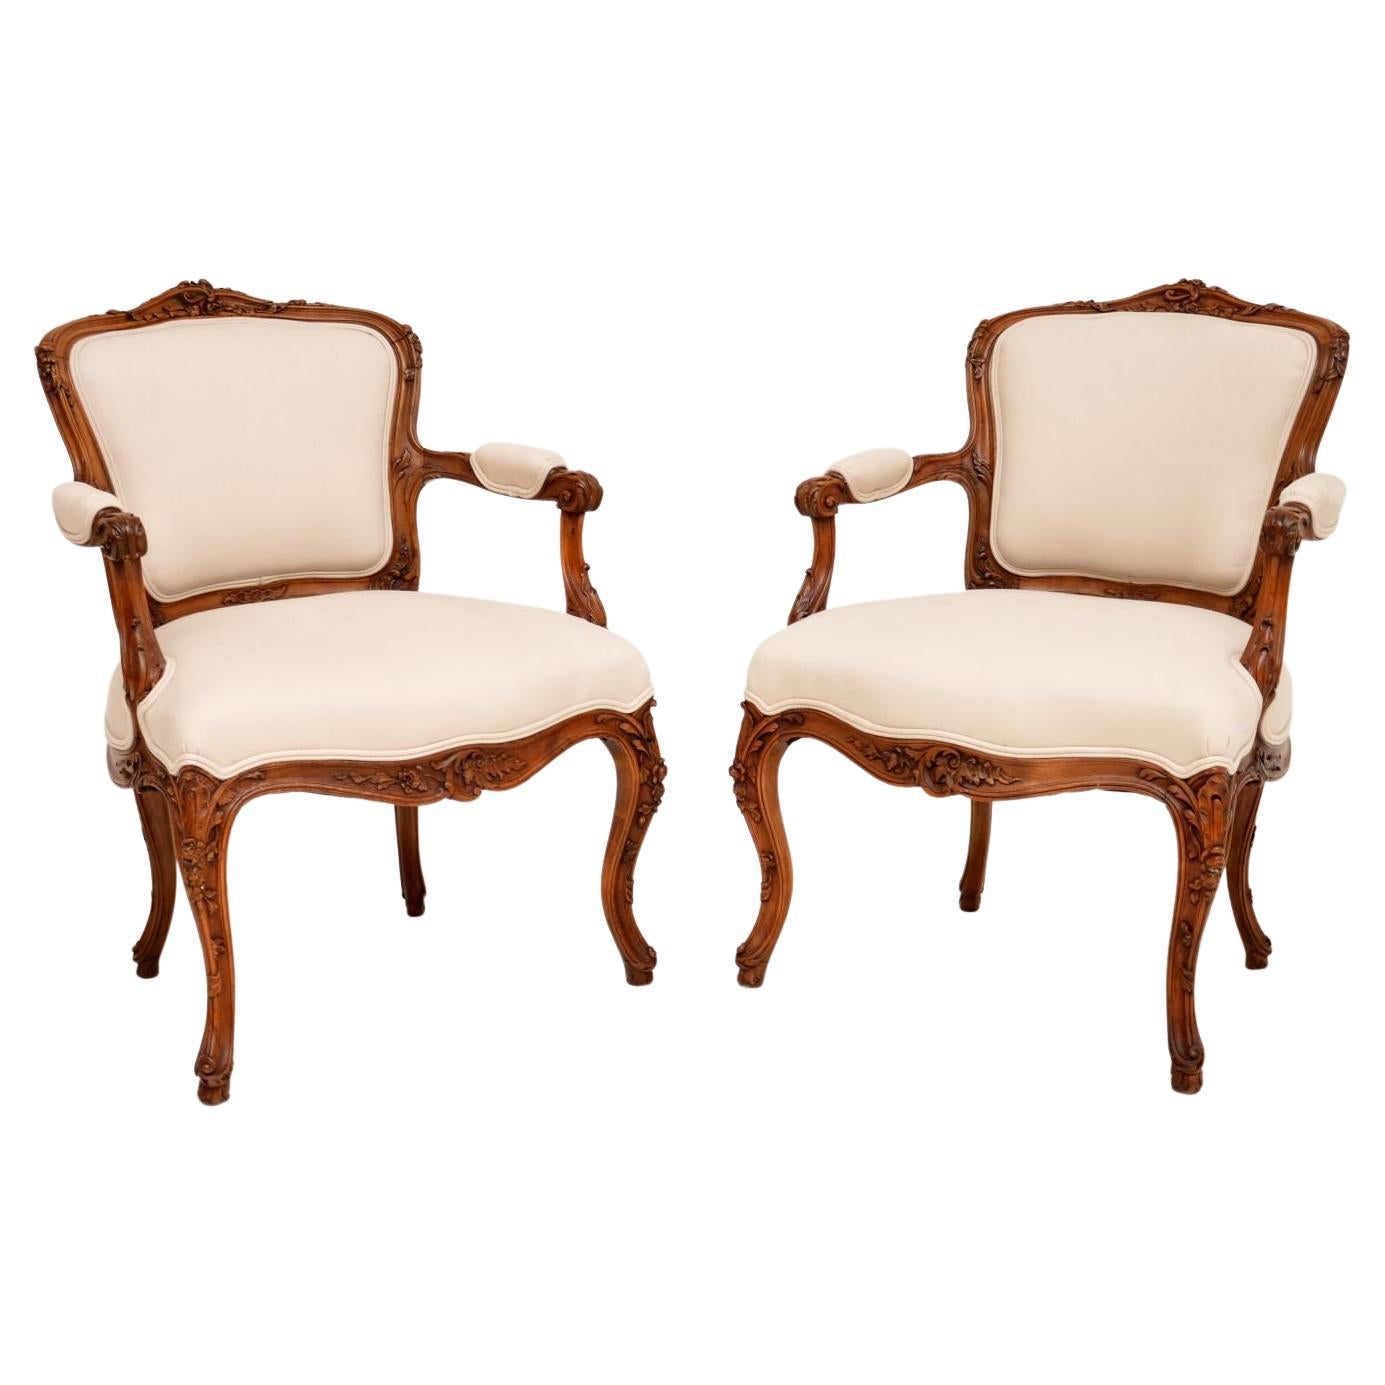 Pair of Antique French Carved Walnut Salon Chairs